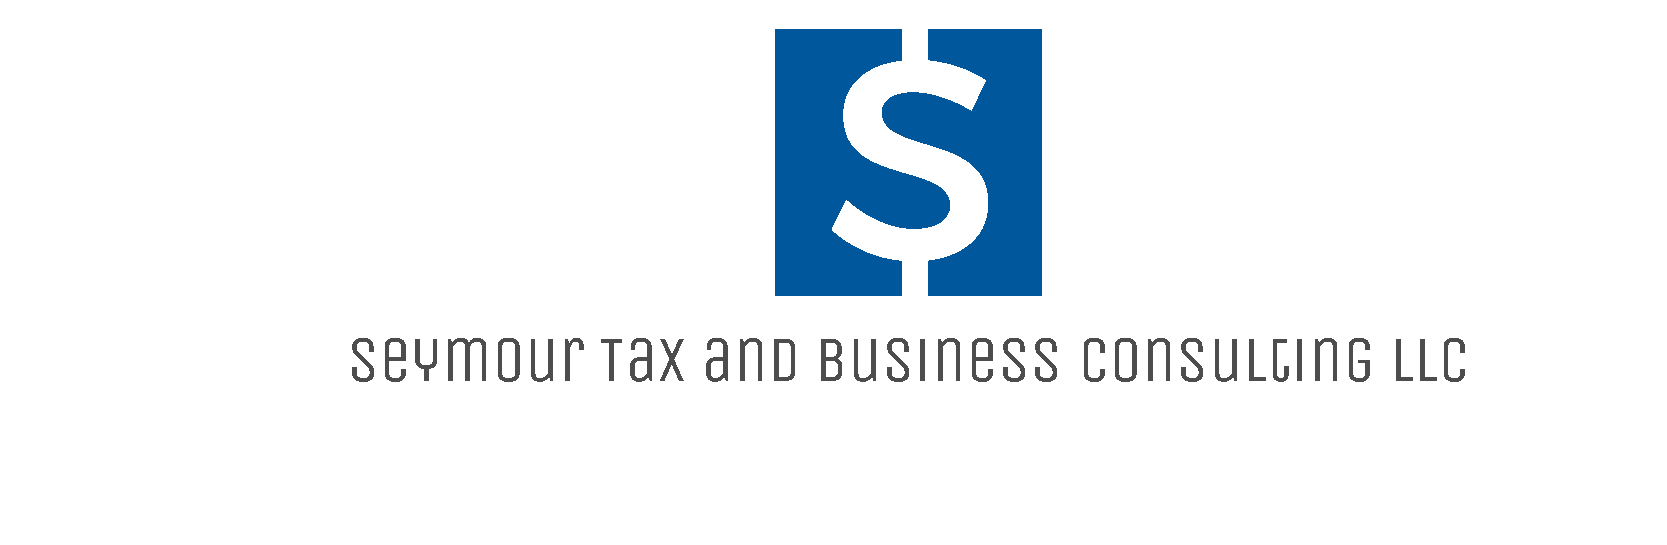 Seymour Tax and Business Consulting LLC